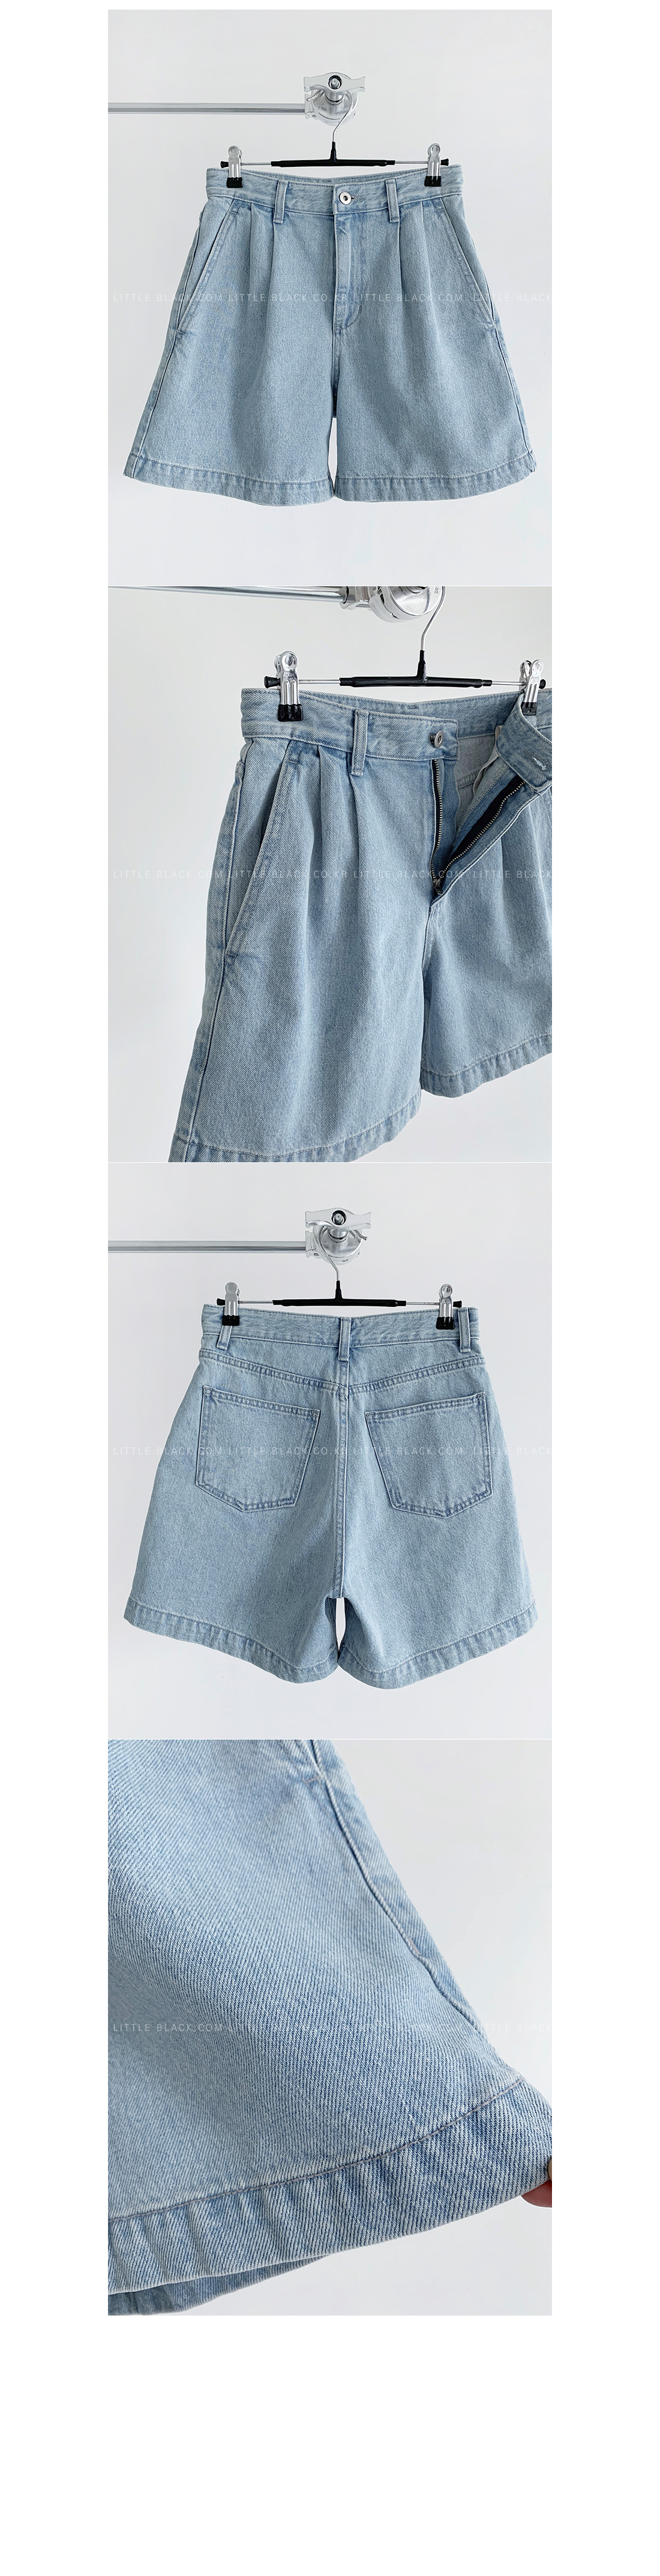 Pleated Front Denim Shorts|